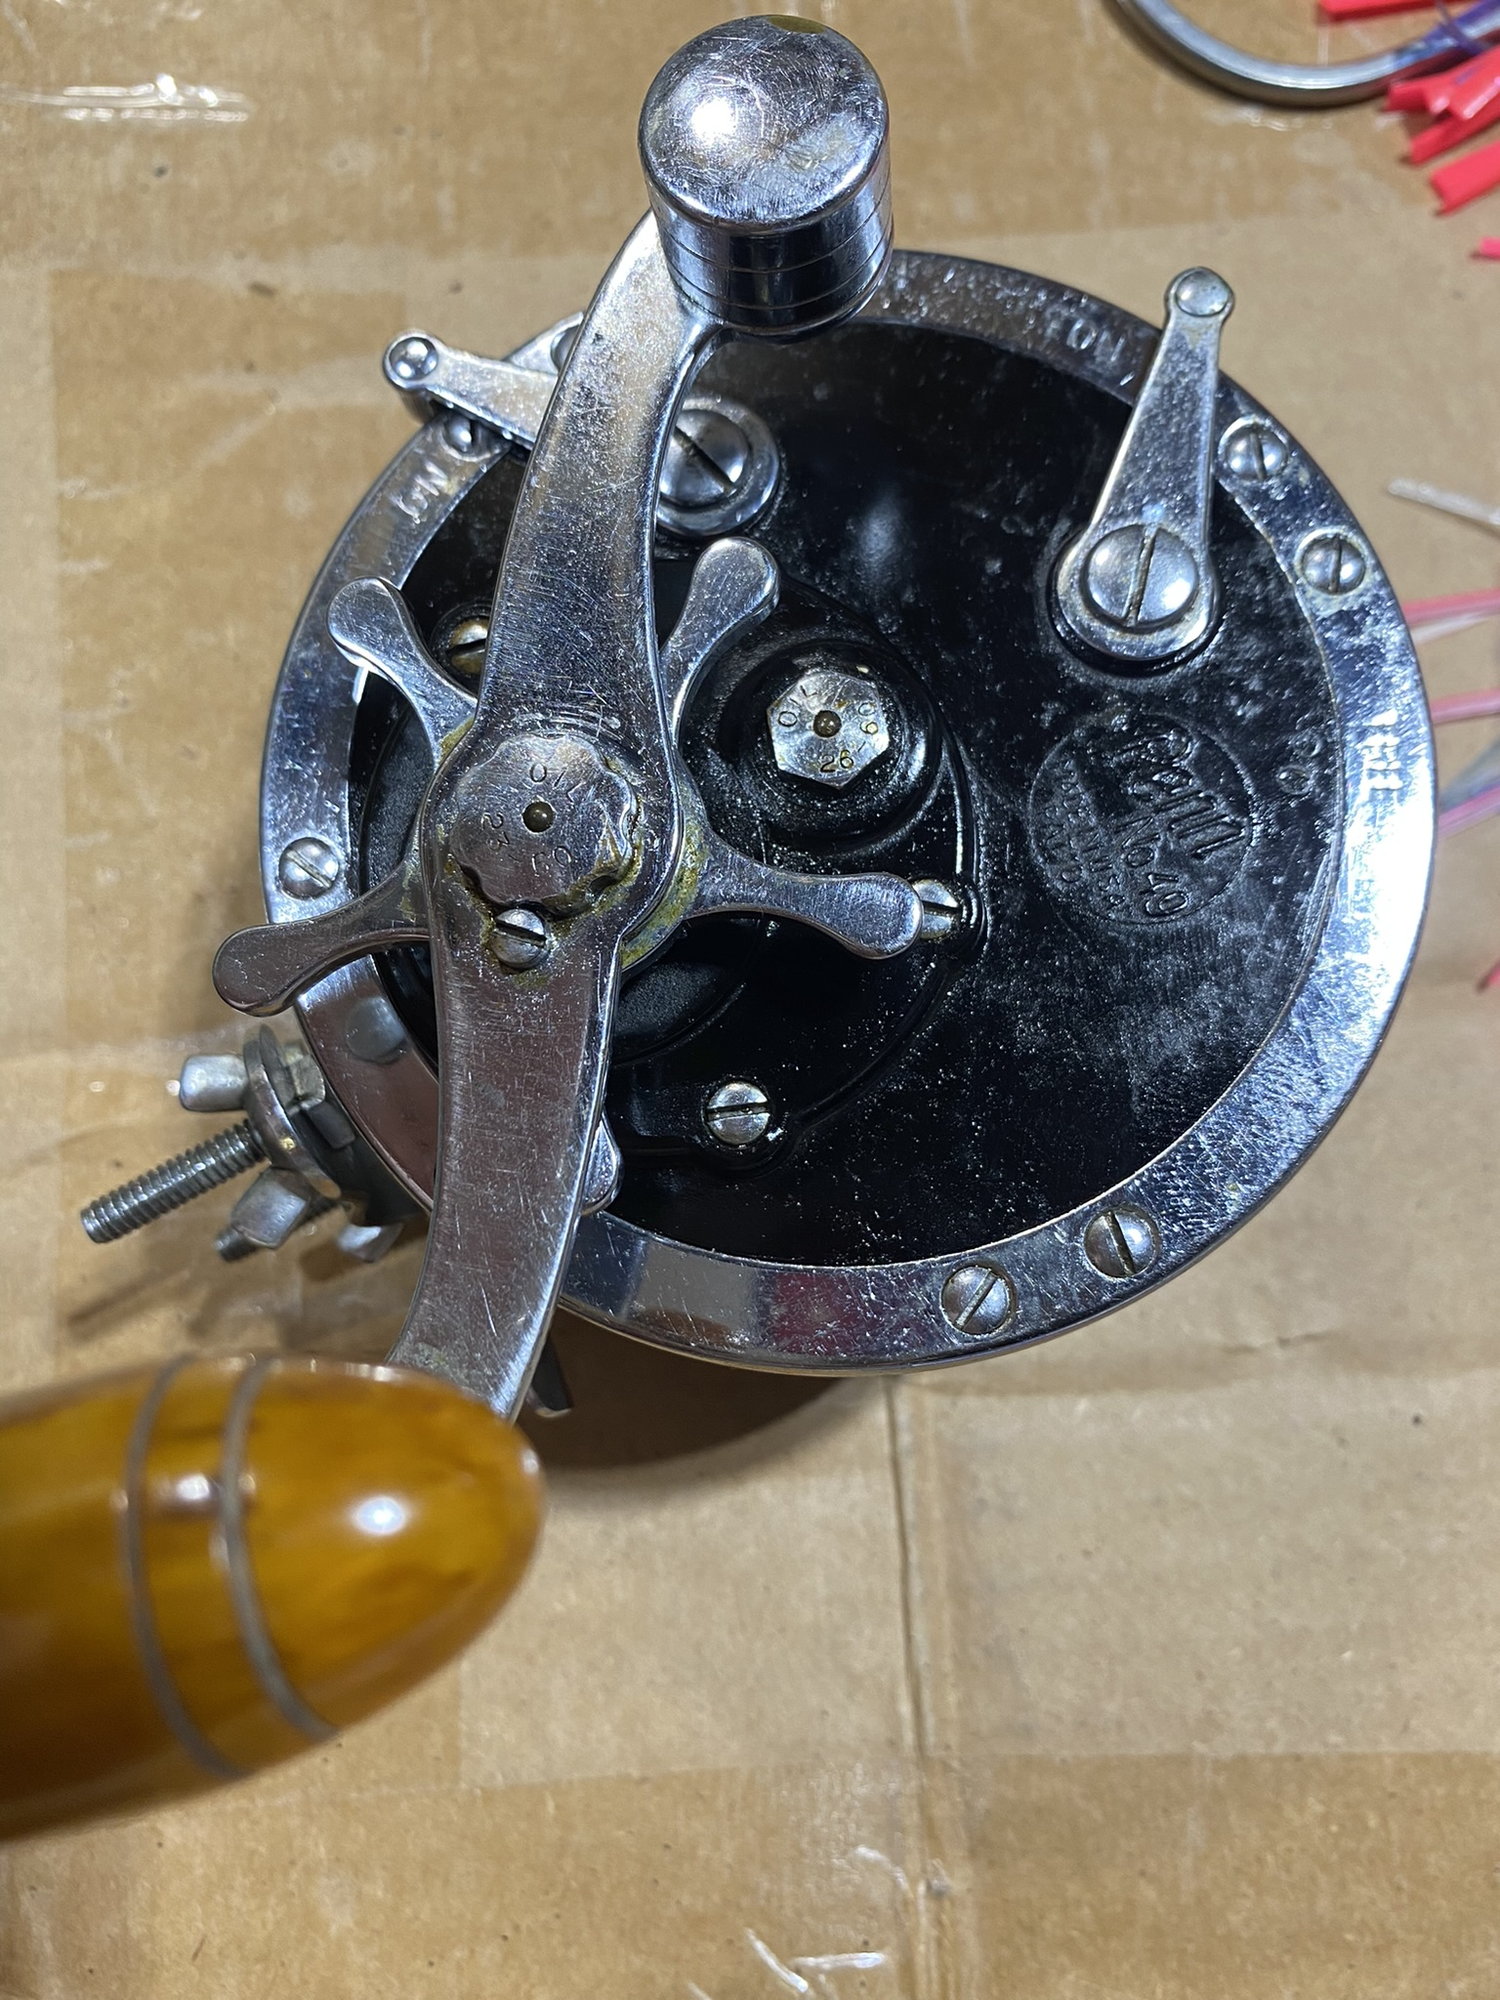 Posts about Vintage Fishing Reels on COLLECTING, ETC.